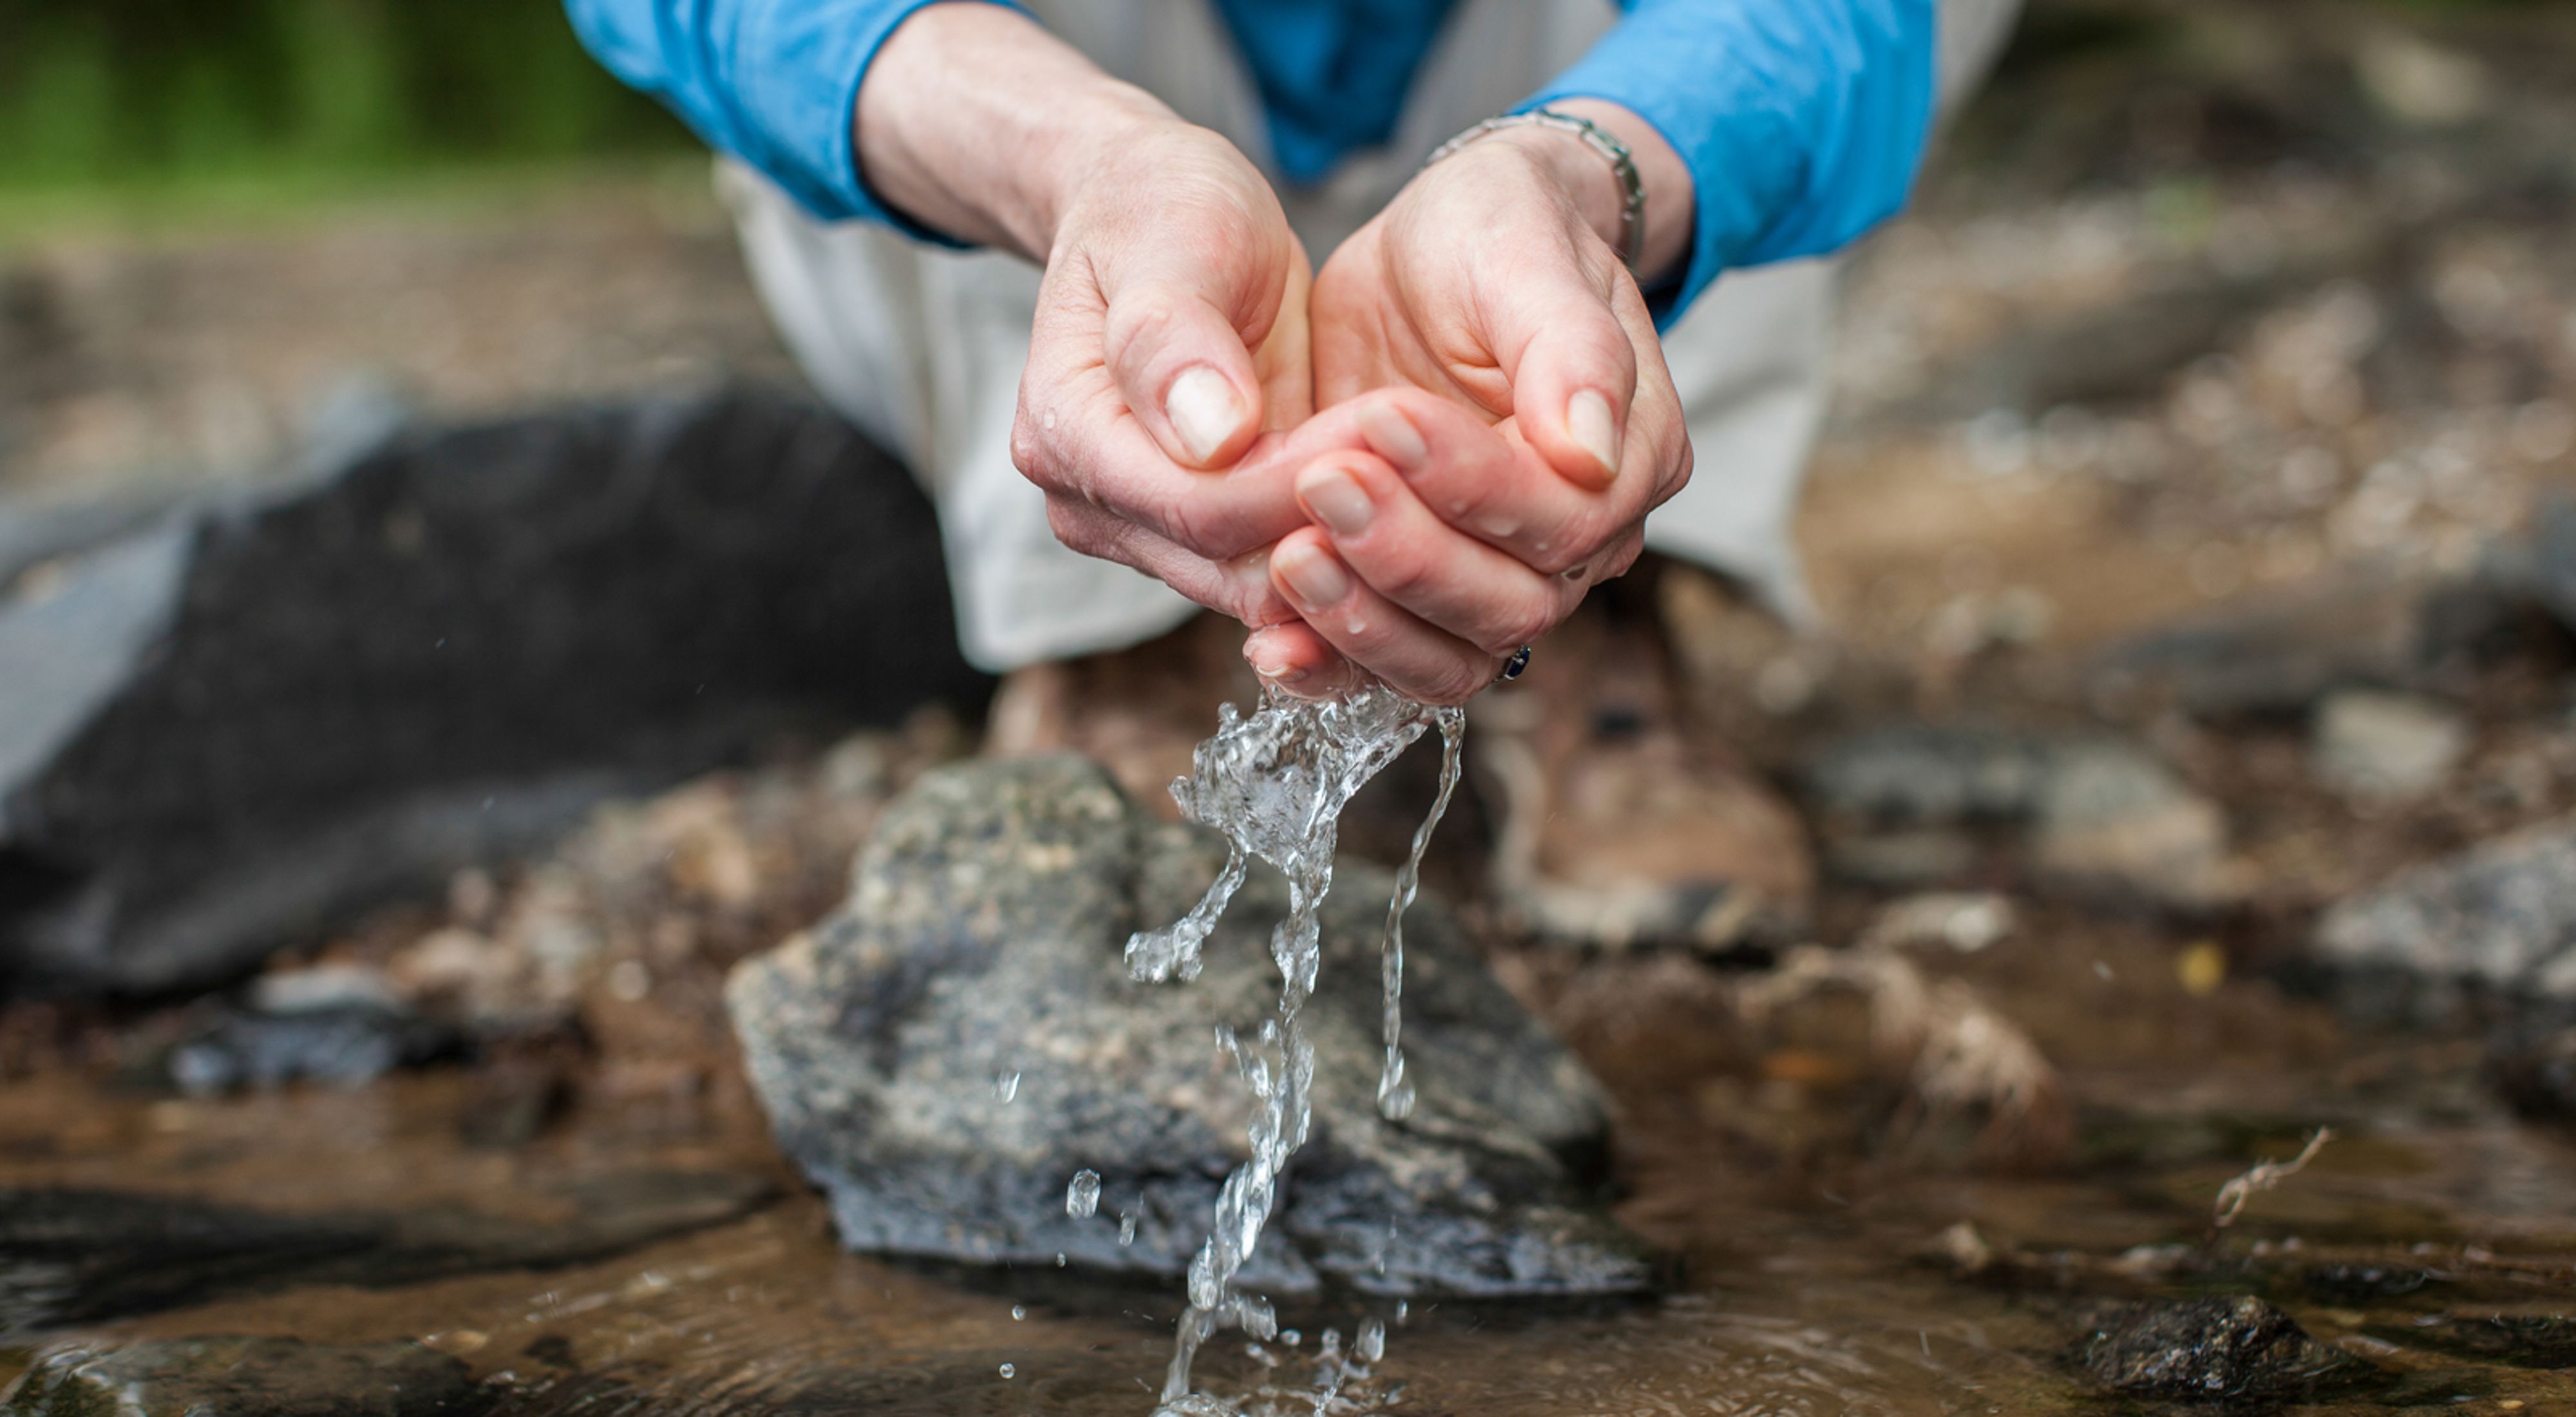 (ALL RIGHTS) July 2013. A woman scoops water with her hands.